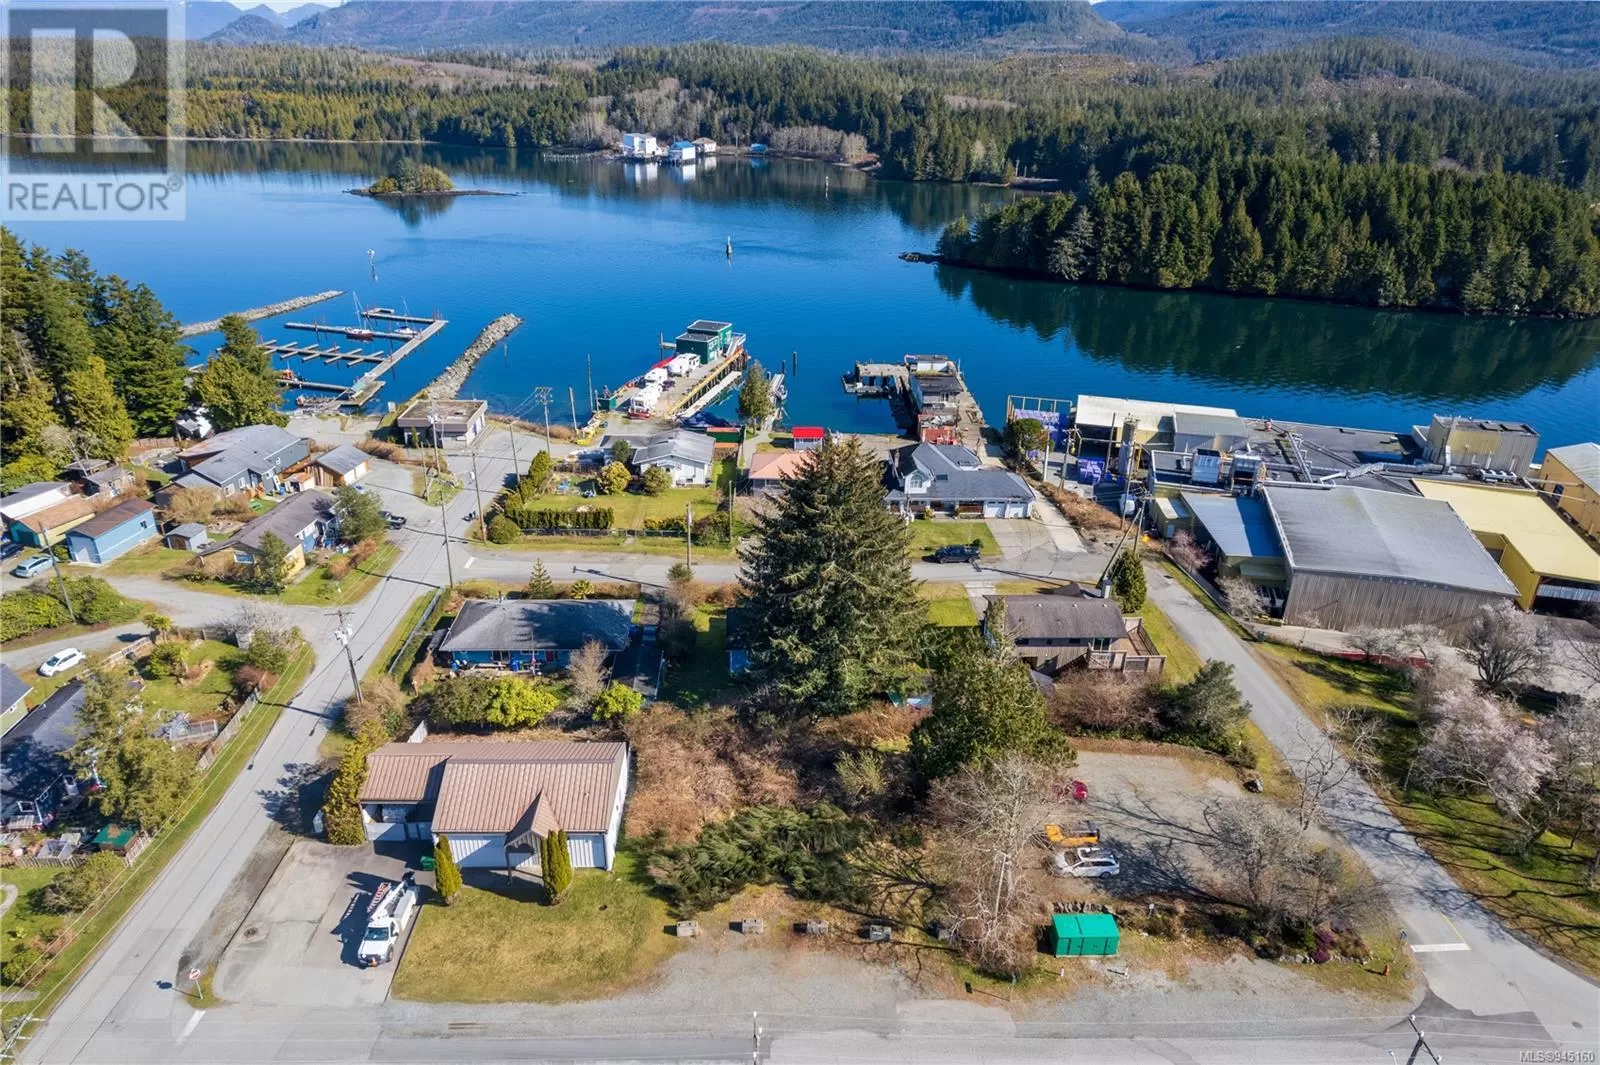 Commercial Mix for rent: 1767 Cedar Rd, Ucluelet, British Columbia V0R 3A0